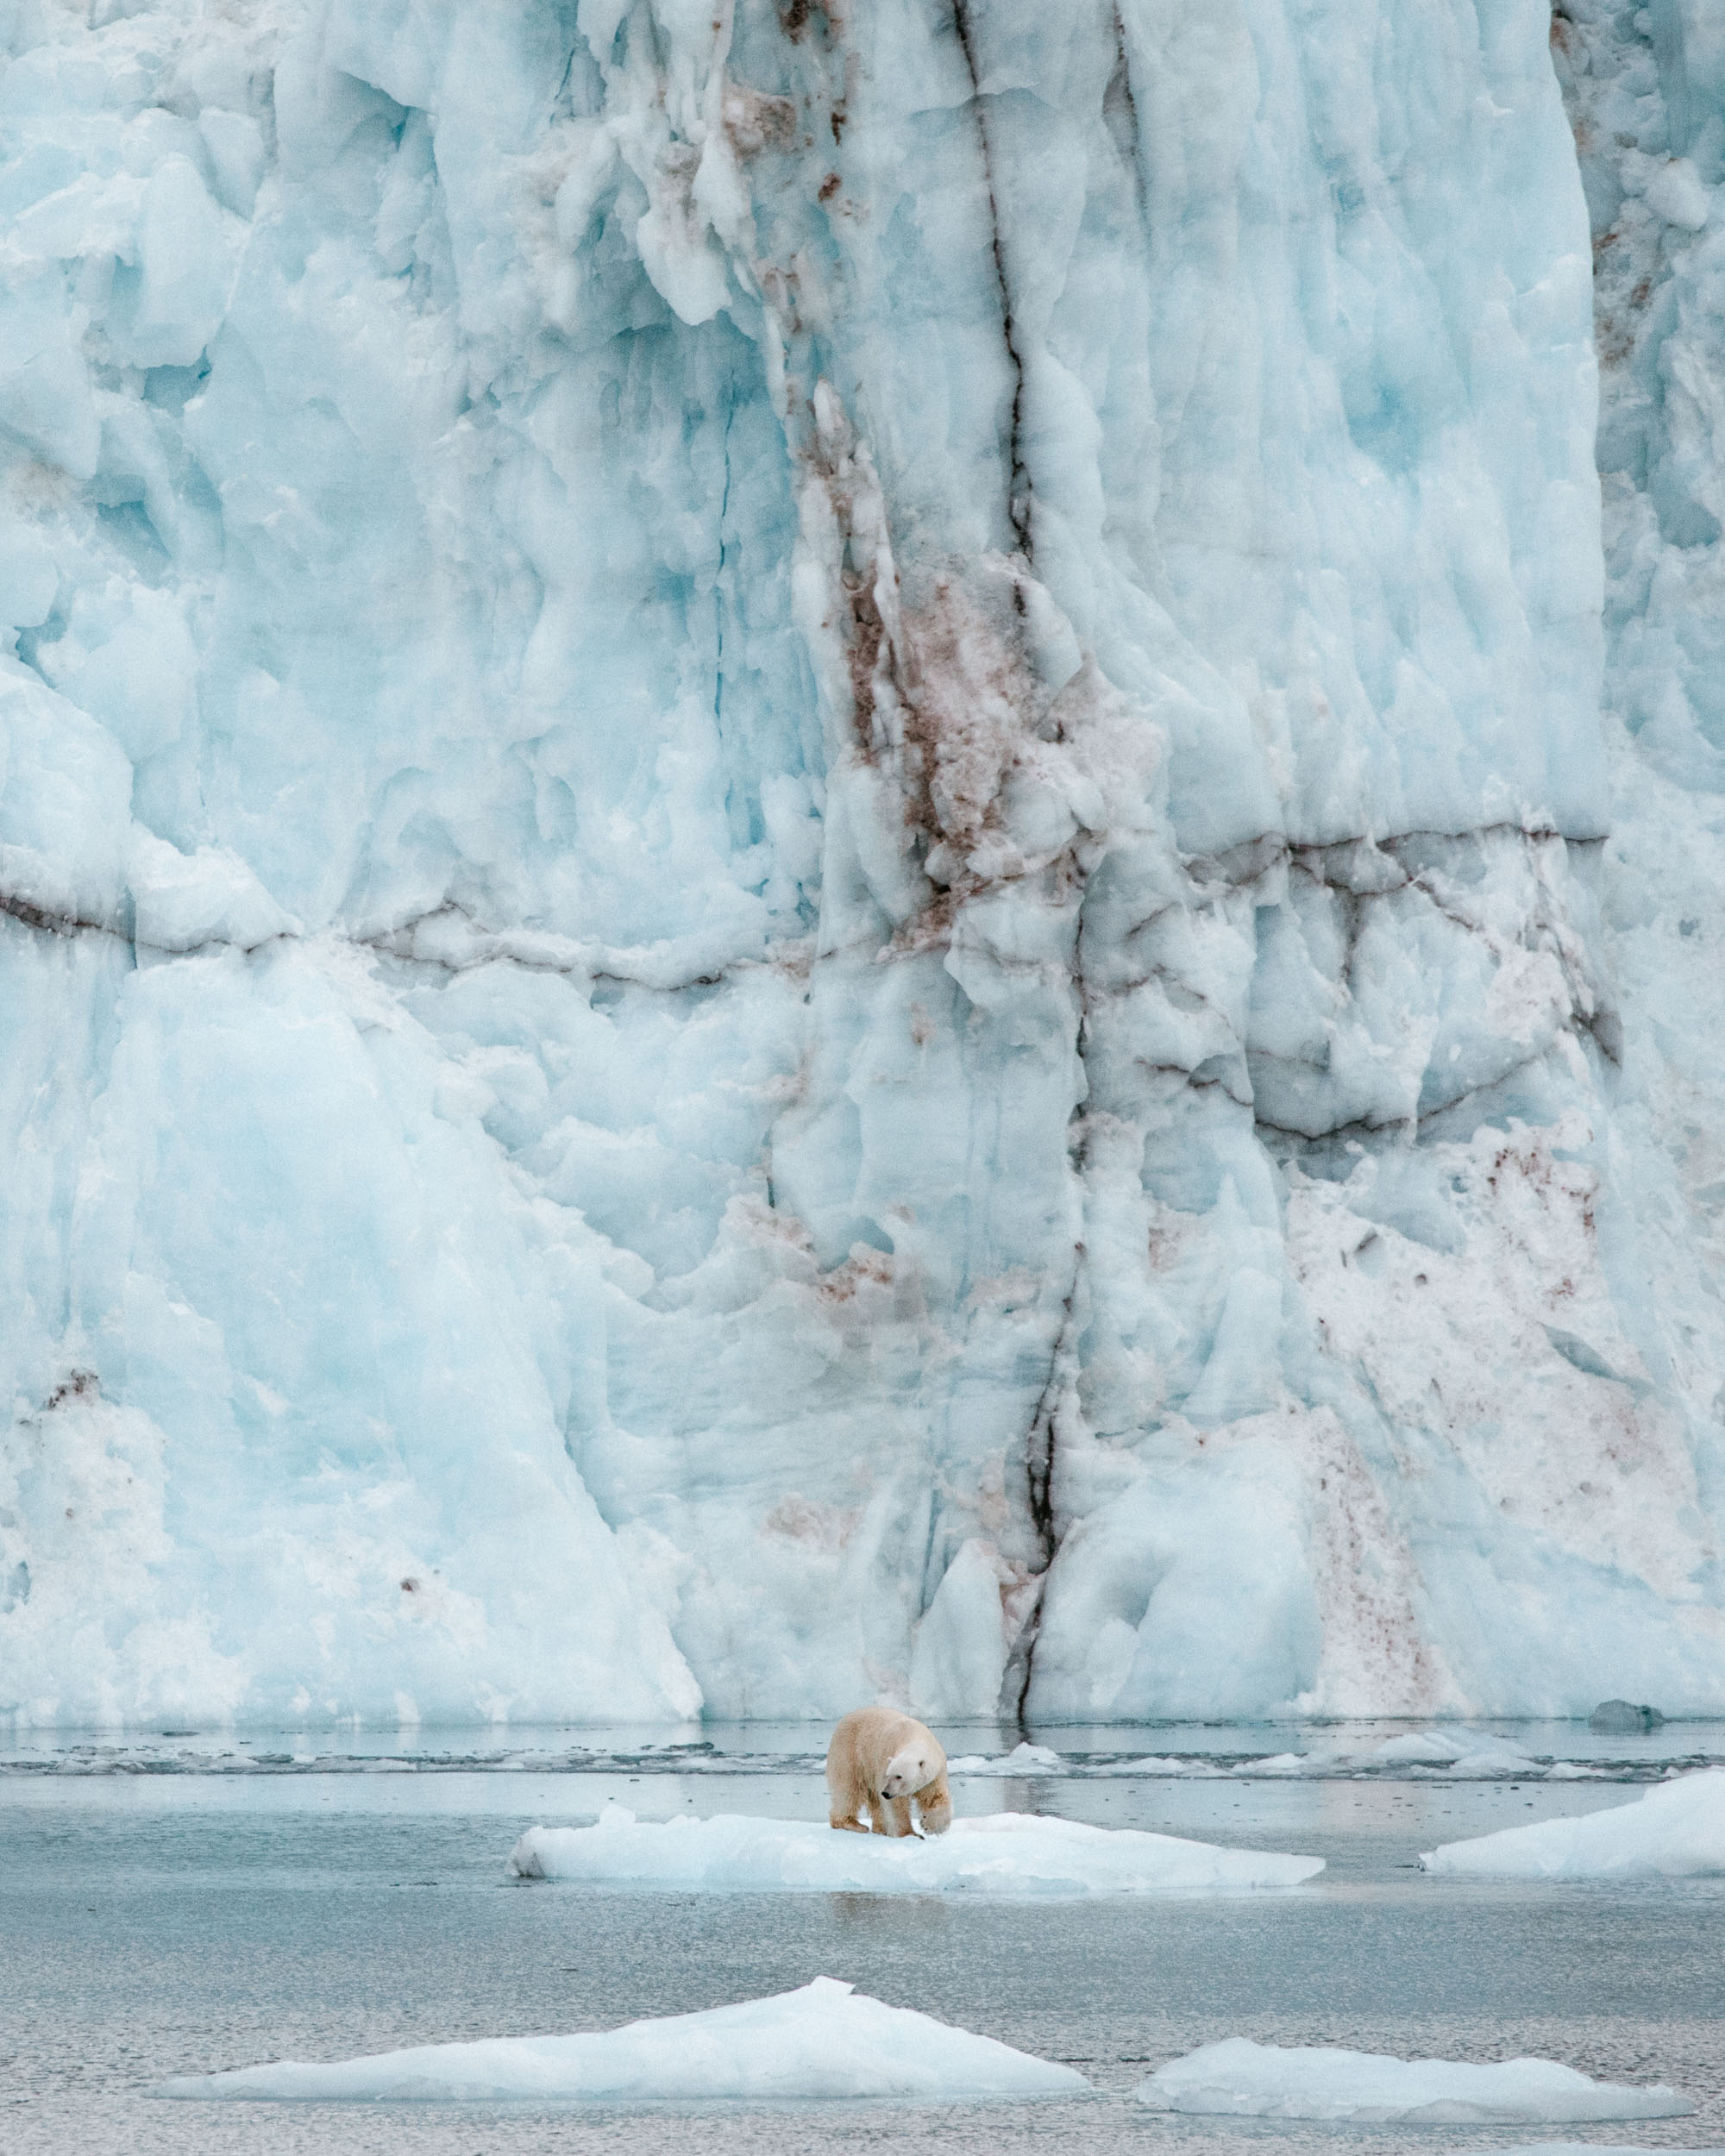 Polar bear on the ice in front of a glacier in Svalbard, Spitsbergen, Norway